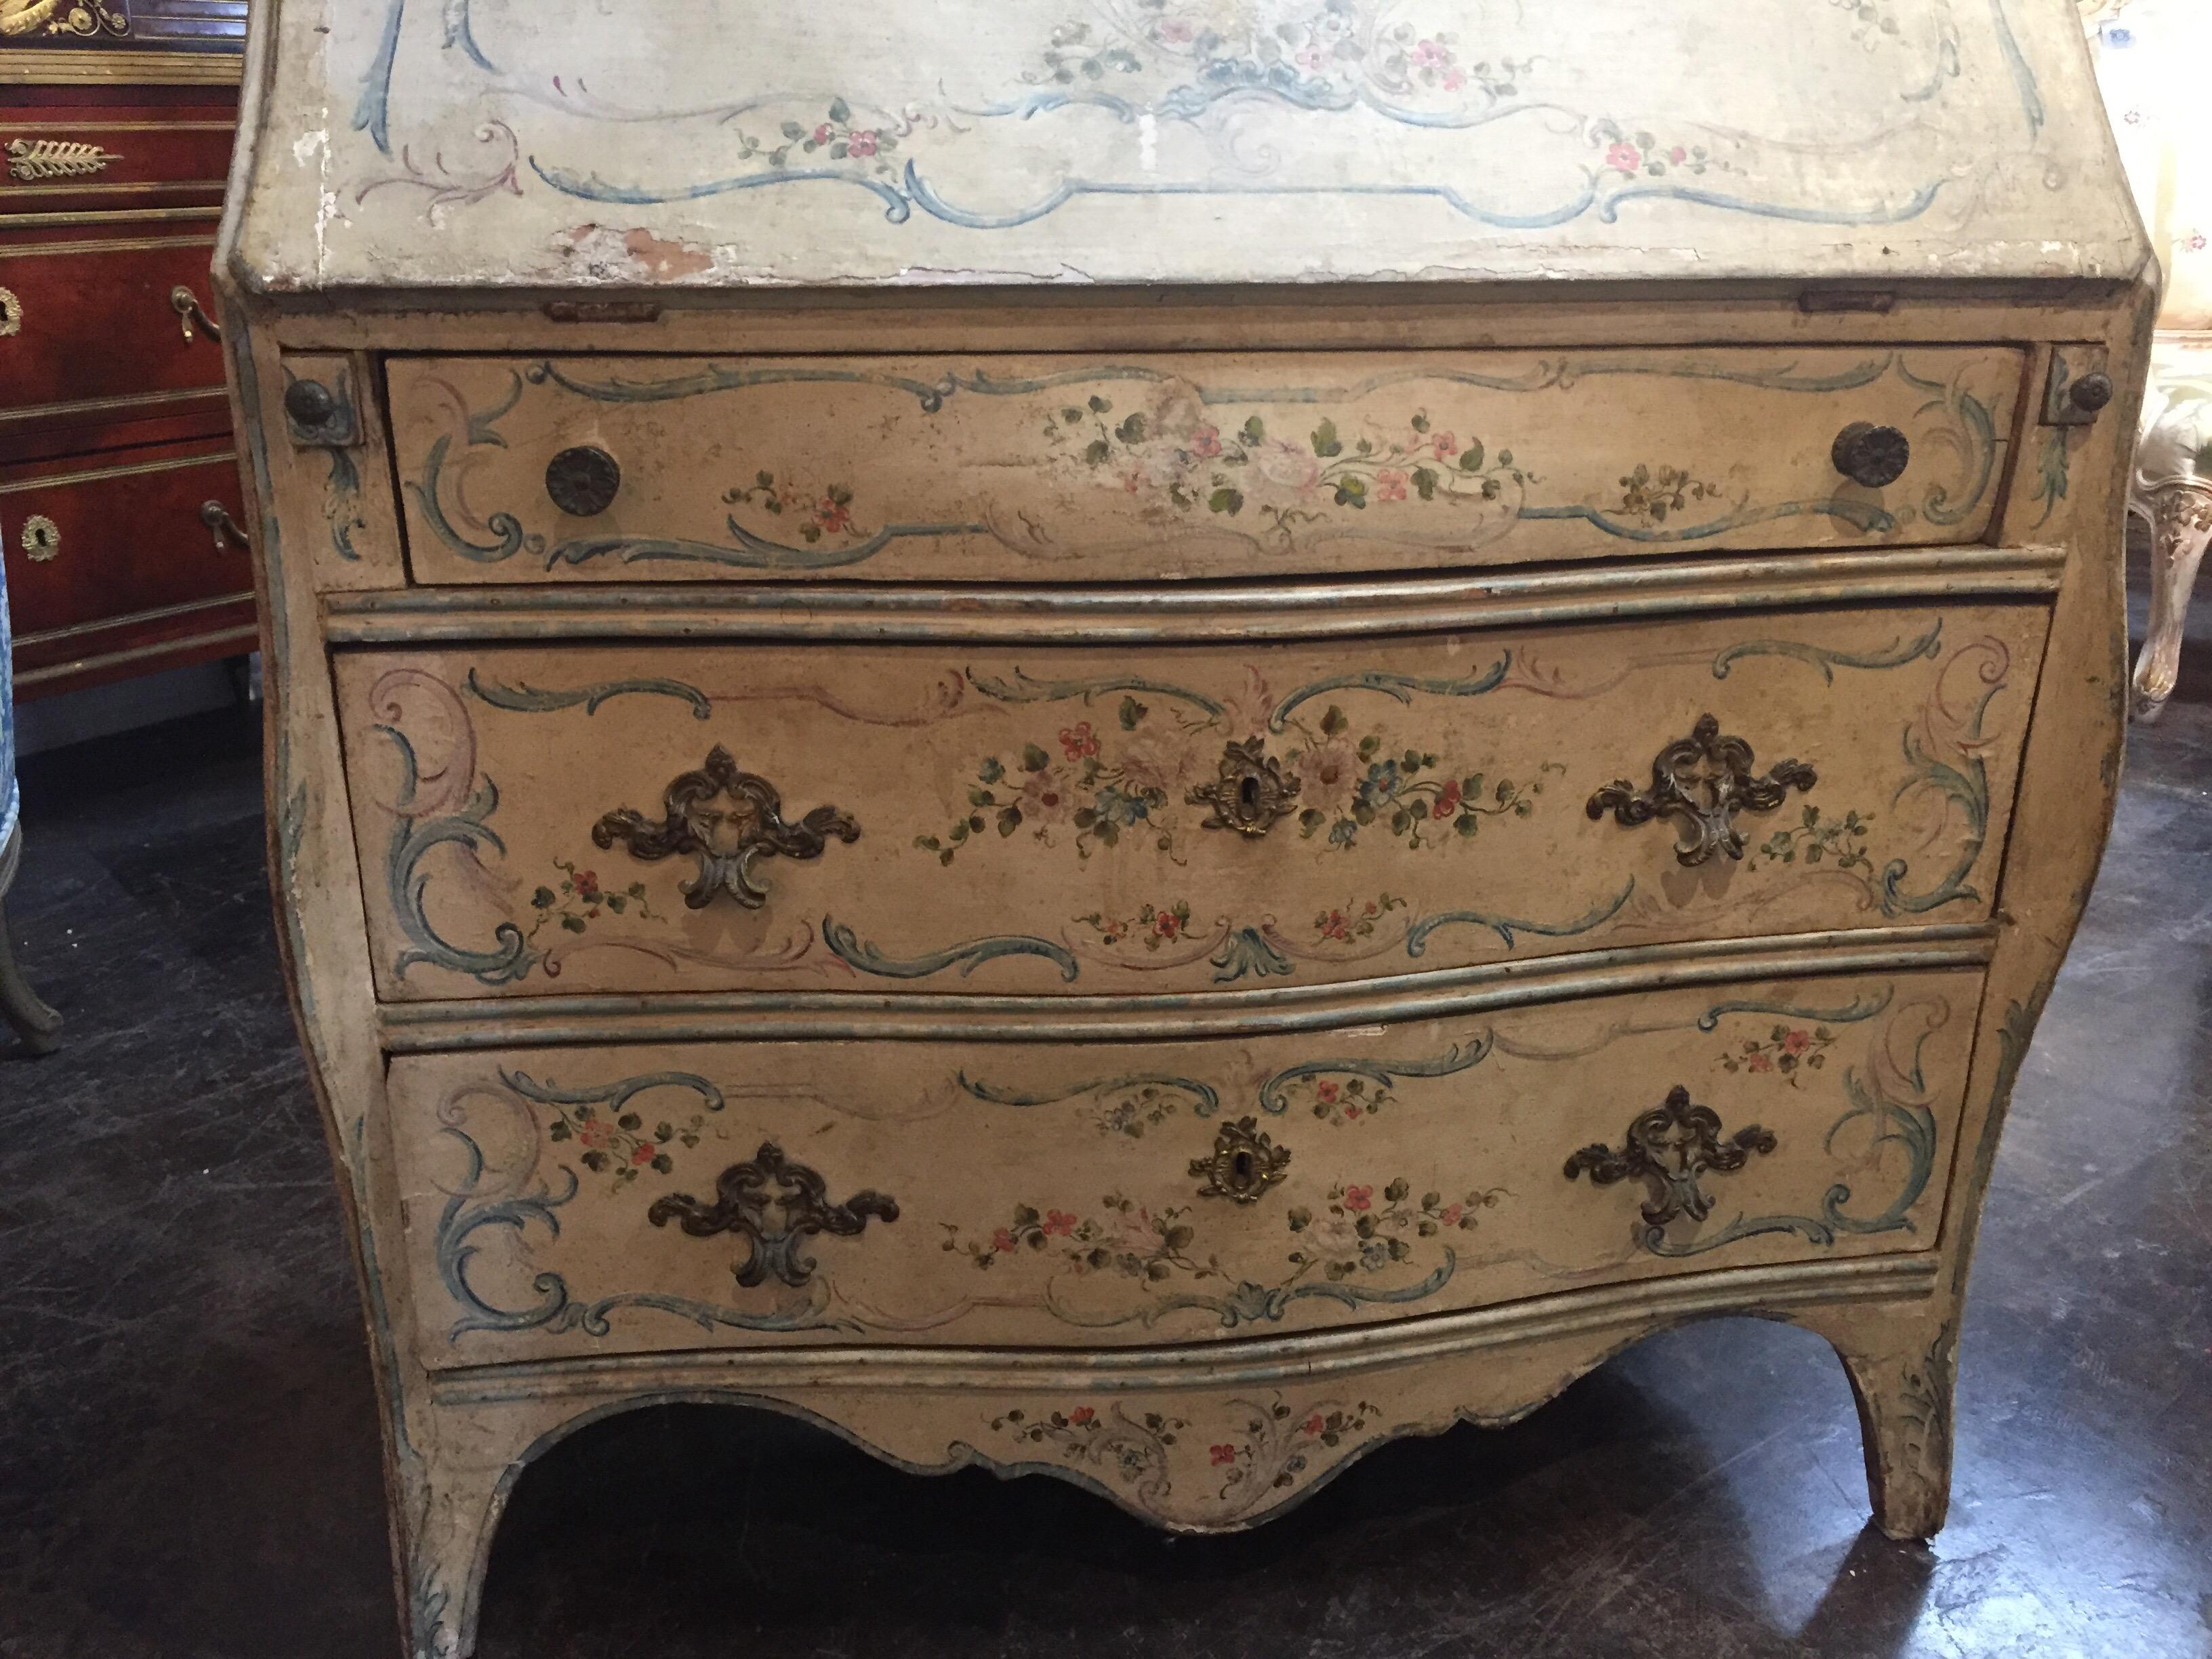 Early 19th century Venetian hand painted secretary with a floral design. Has nice workable area and storage inside the desk. A nice addition to a sitting room or study.